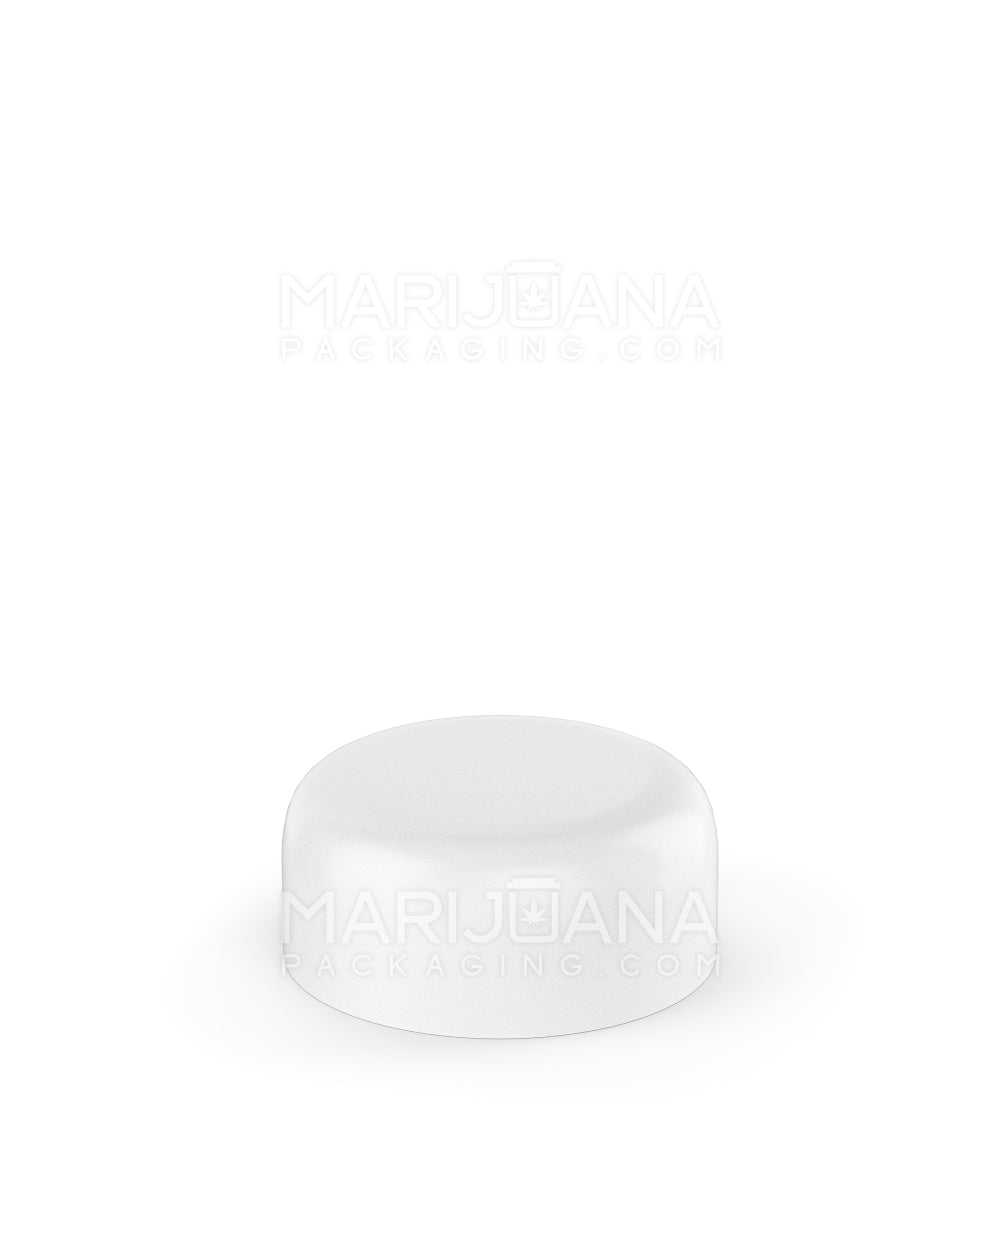 Child Resistant | Glossy White Glass Concentrate Containers w/ Cap | 29mm - 5mL - 504 Count